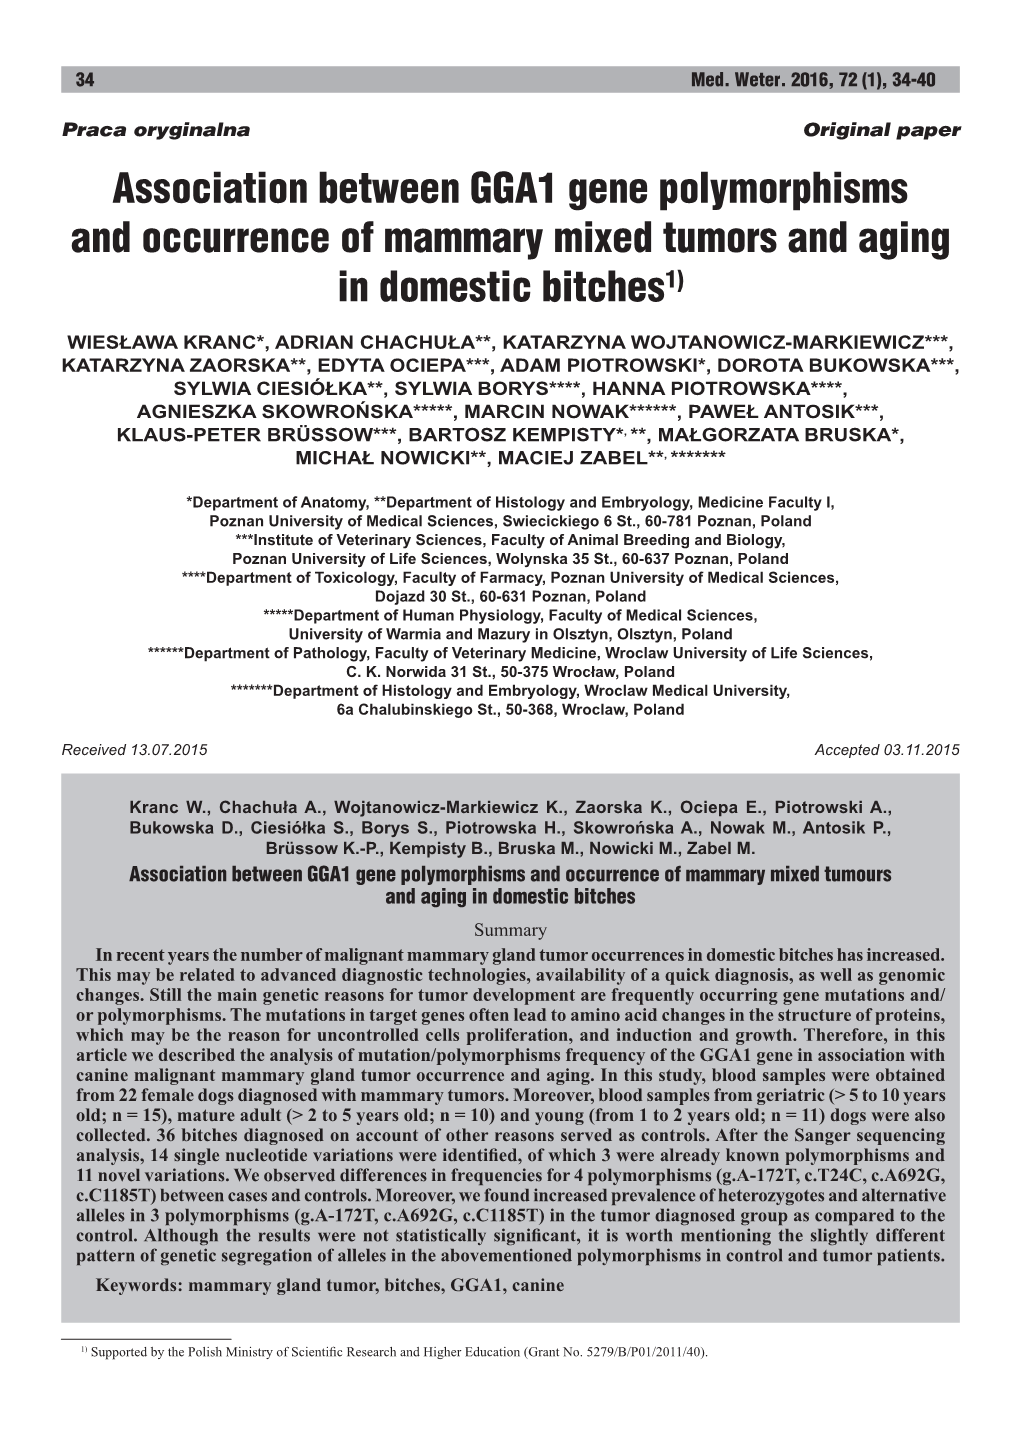 Association Between GGA1 Gene Polymorphisms and Occurrence of Mammary Mixed Tumors and Aging in Domestic Bitches1)